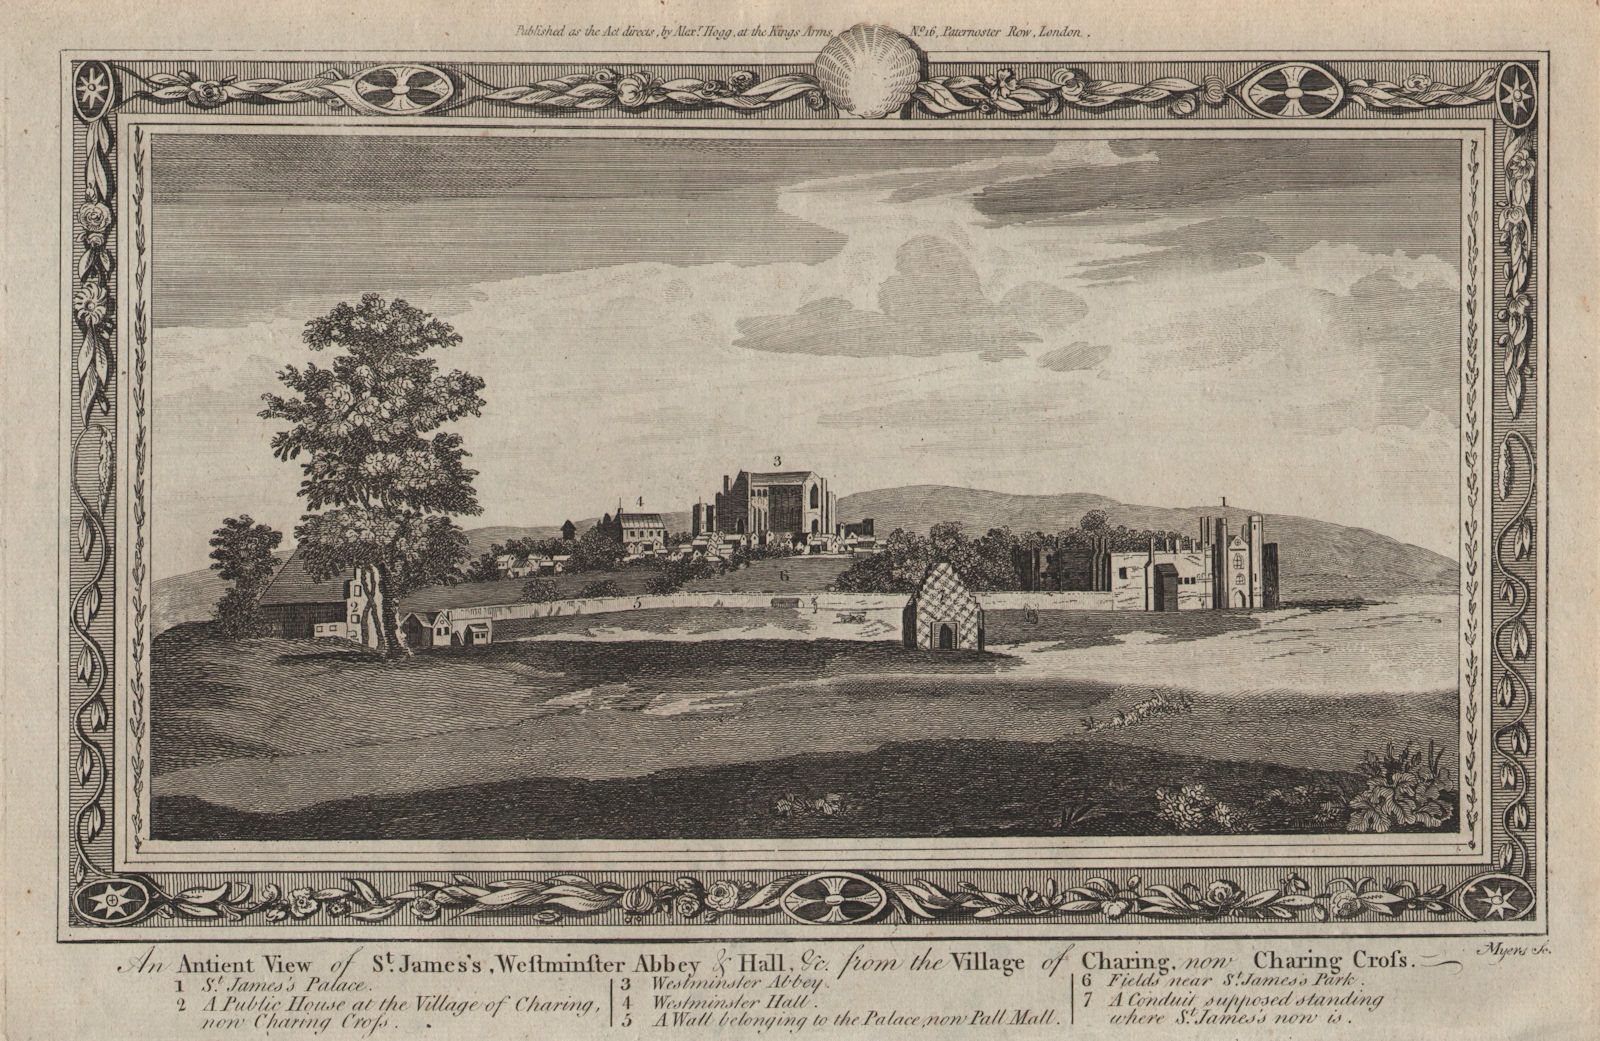 Associate Product Ancient view of St James's & Westminster from Charing [Cross]. THORNTON 1784